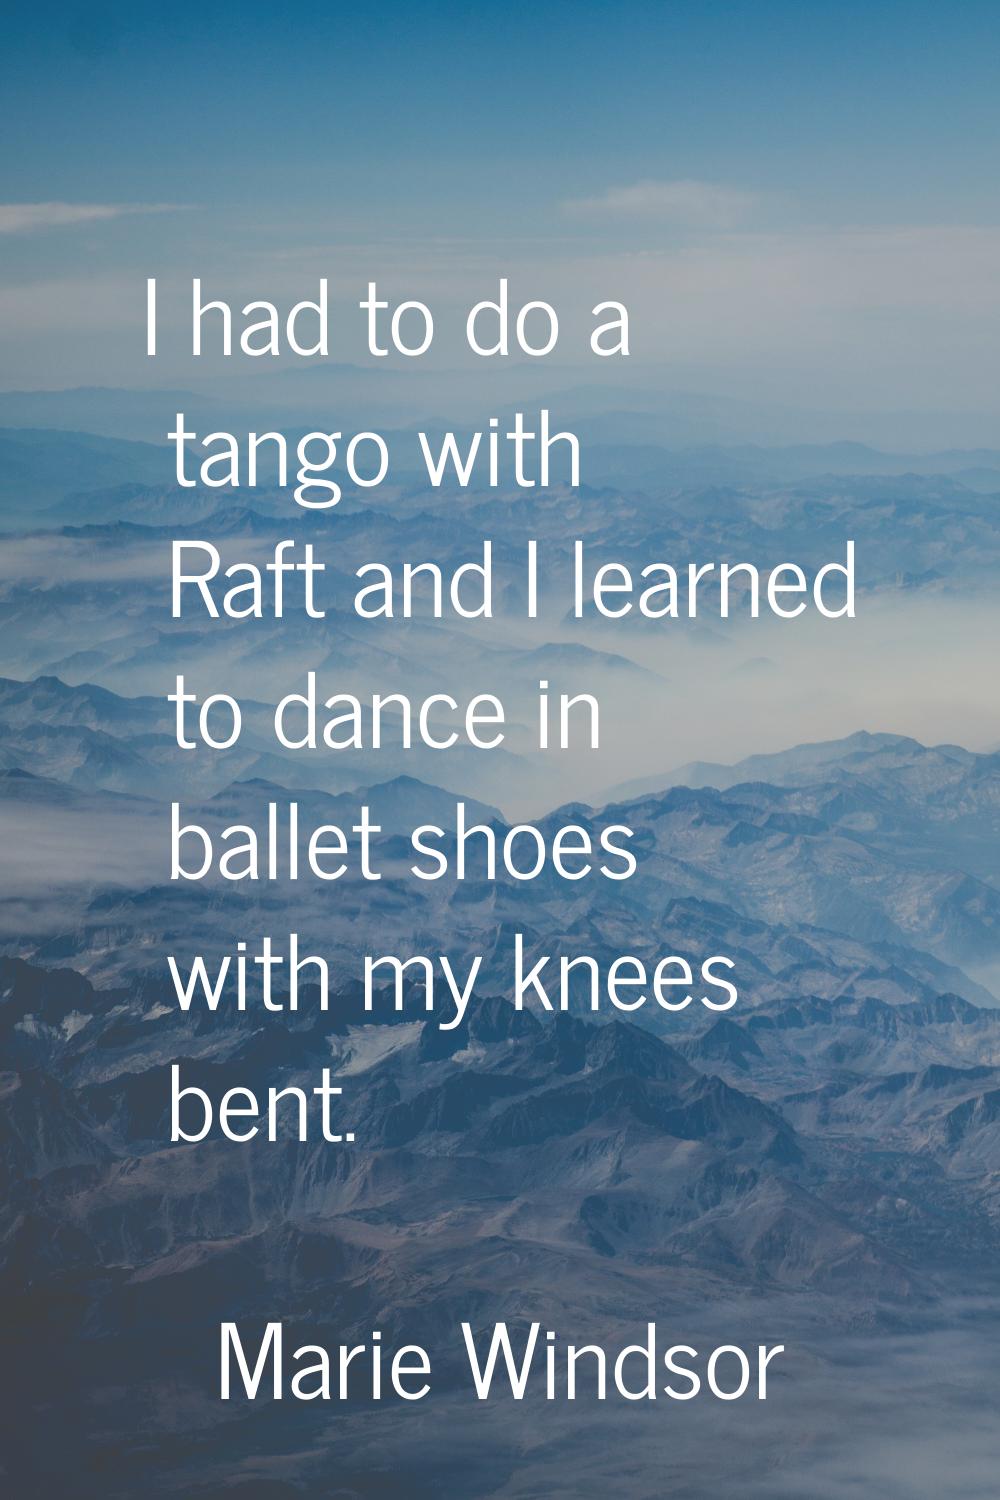 I had to do a tango with Raft and I learned to dance in ballet shoes with my knees bent.